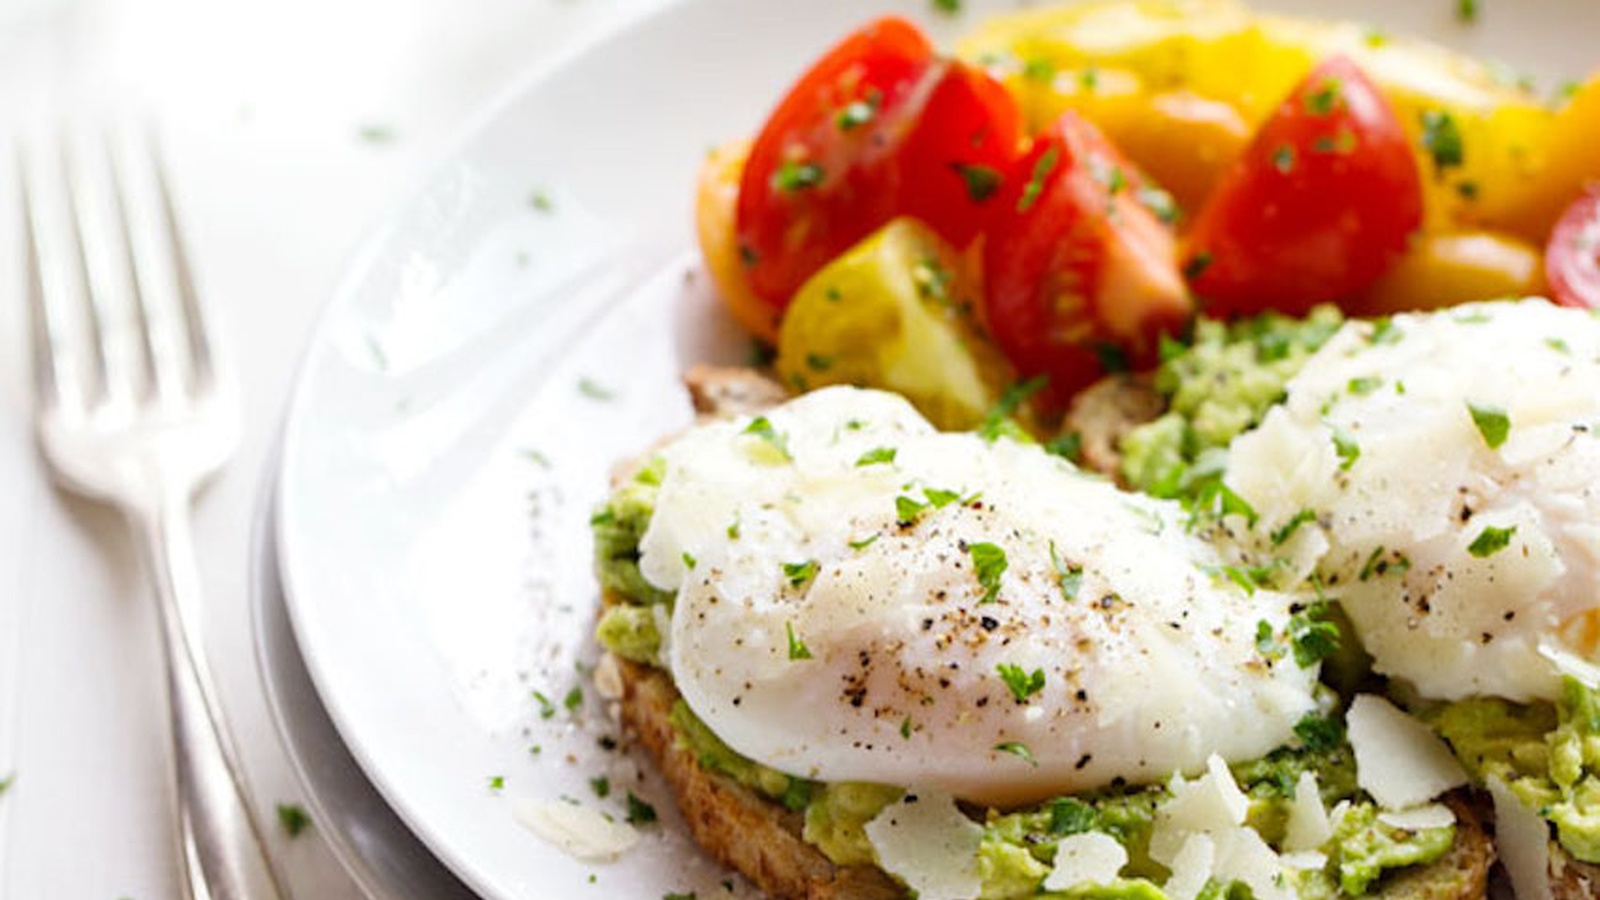 10 Breakfasts You Can Make In Under 10 Minutes